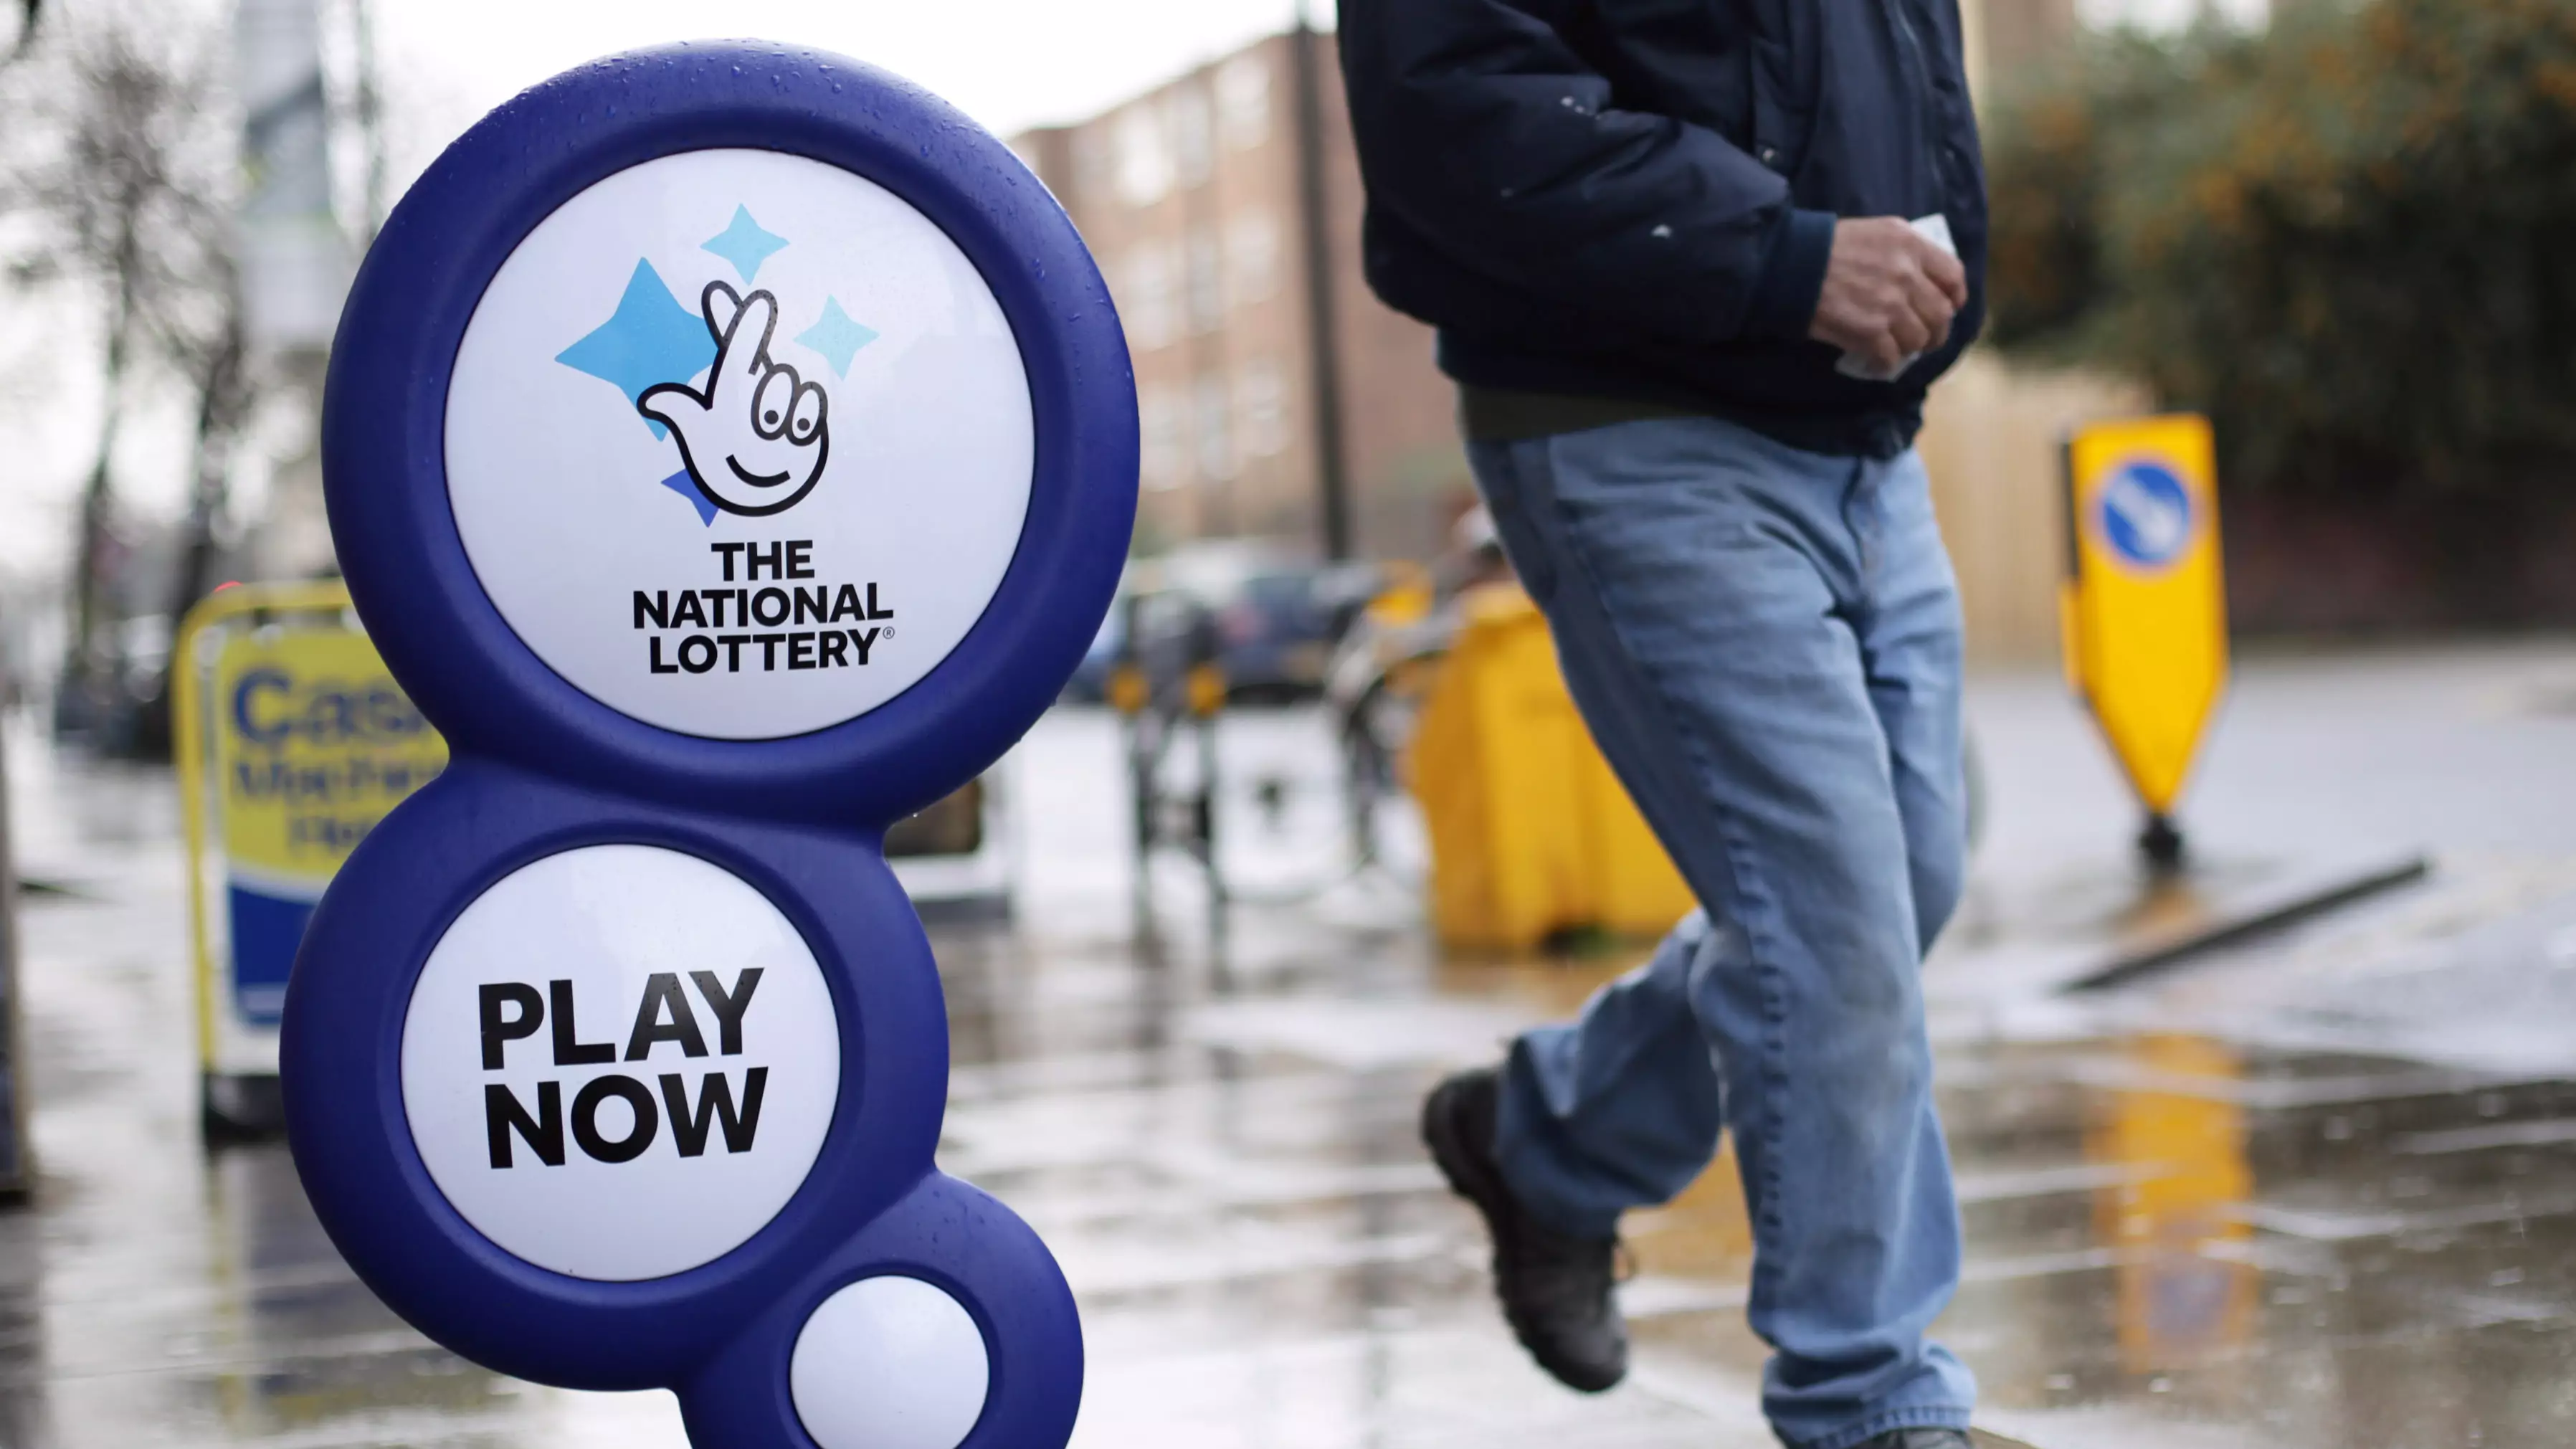 Players Could Be Buying Scratchcards Unaware That Top Prizes Have Already Been Won